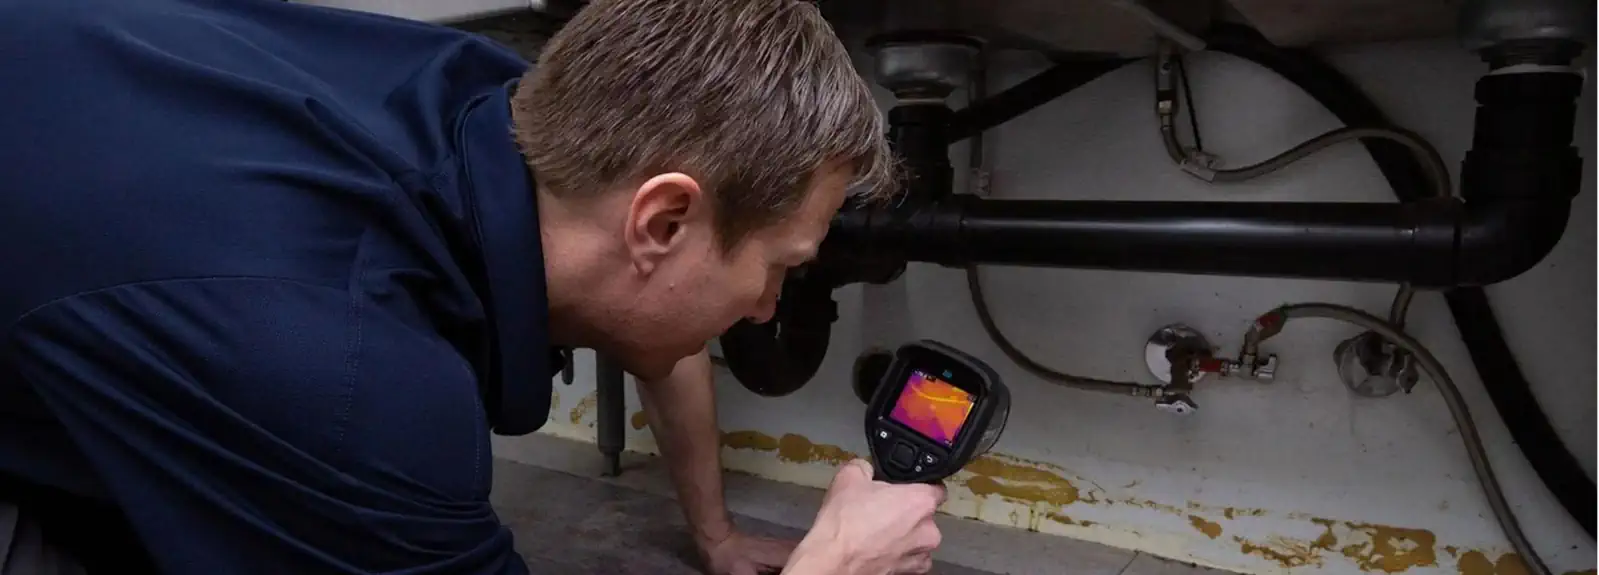 investigating leaks using an infrared camera